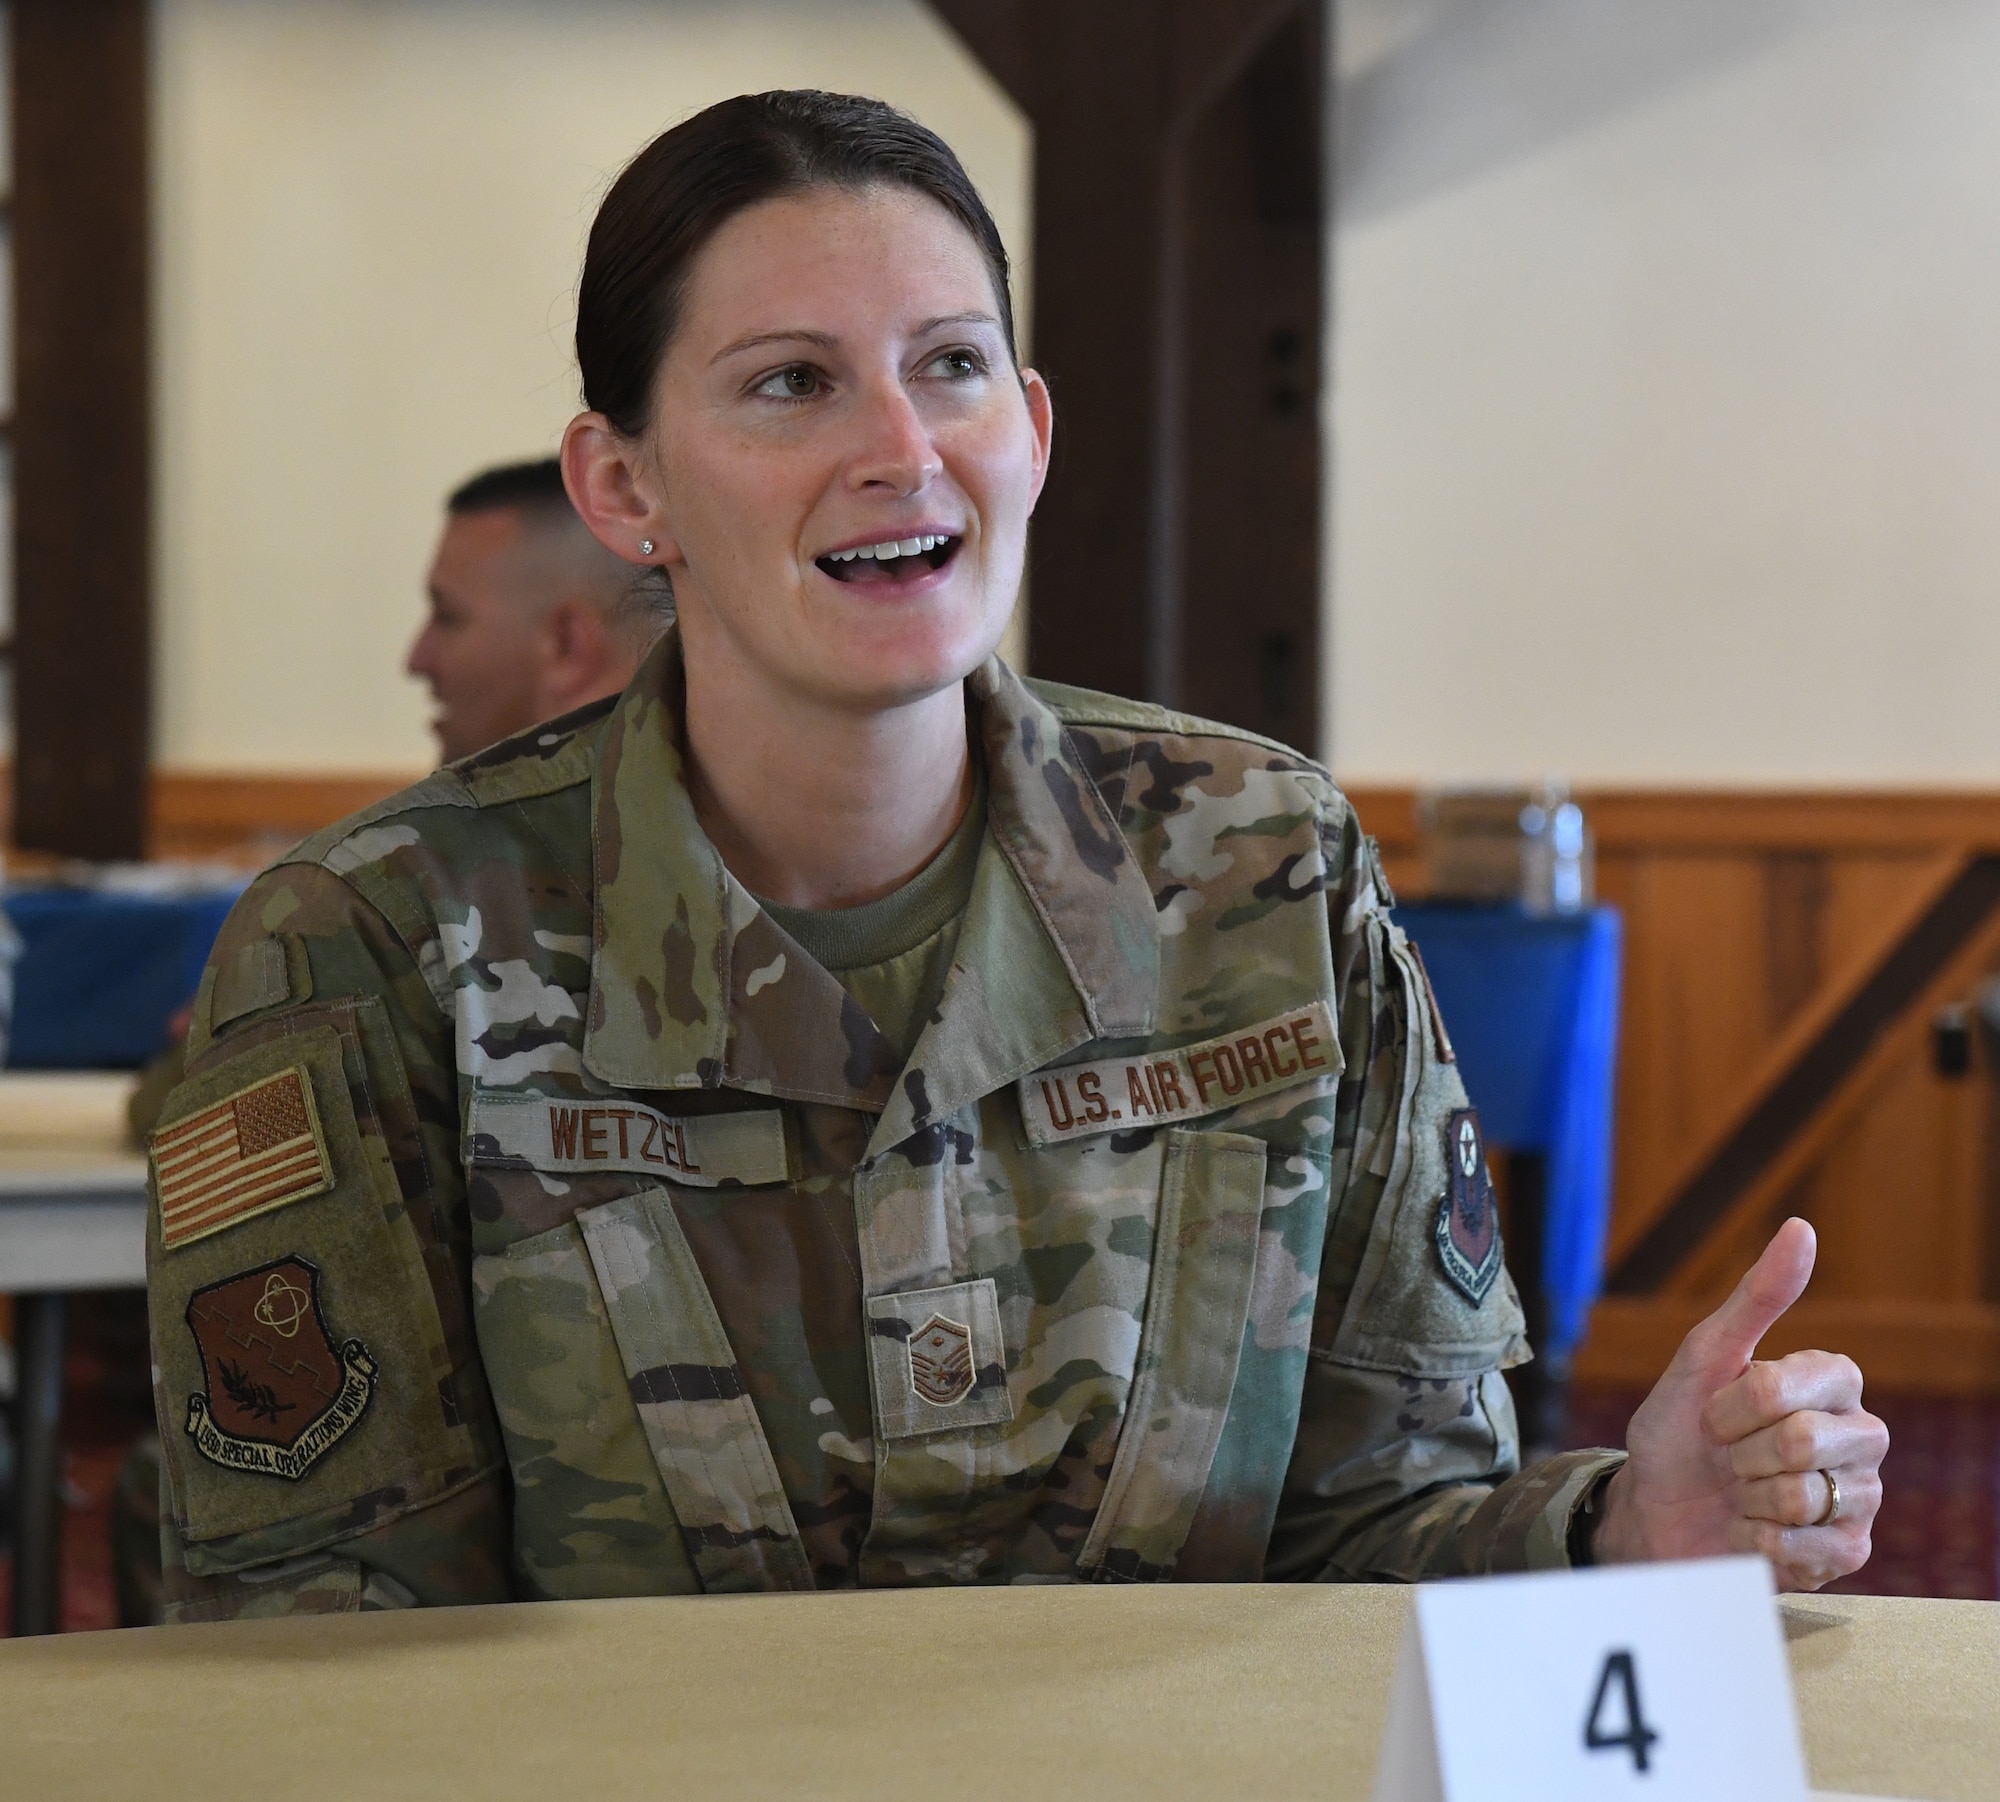 U.S. Air Force Master Sgt. Katrina Wetzel, first sergeant of the 193rd Special Operations Security Forces Squadron, shares her Air National Guard experience and gives advice to non-commissioned officers in a speed-mentoring exercise during the leadership development program held at Fort Indiantown Gap, Pennsylvania, Sept. 20, 2022